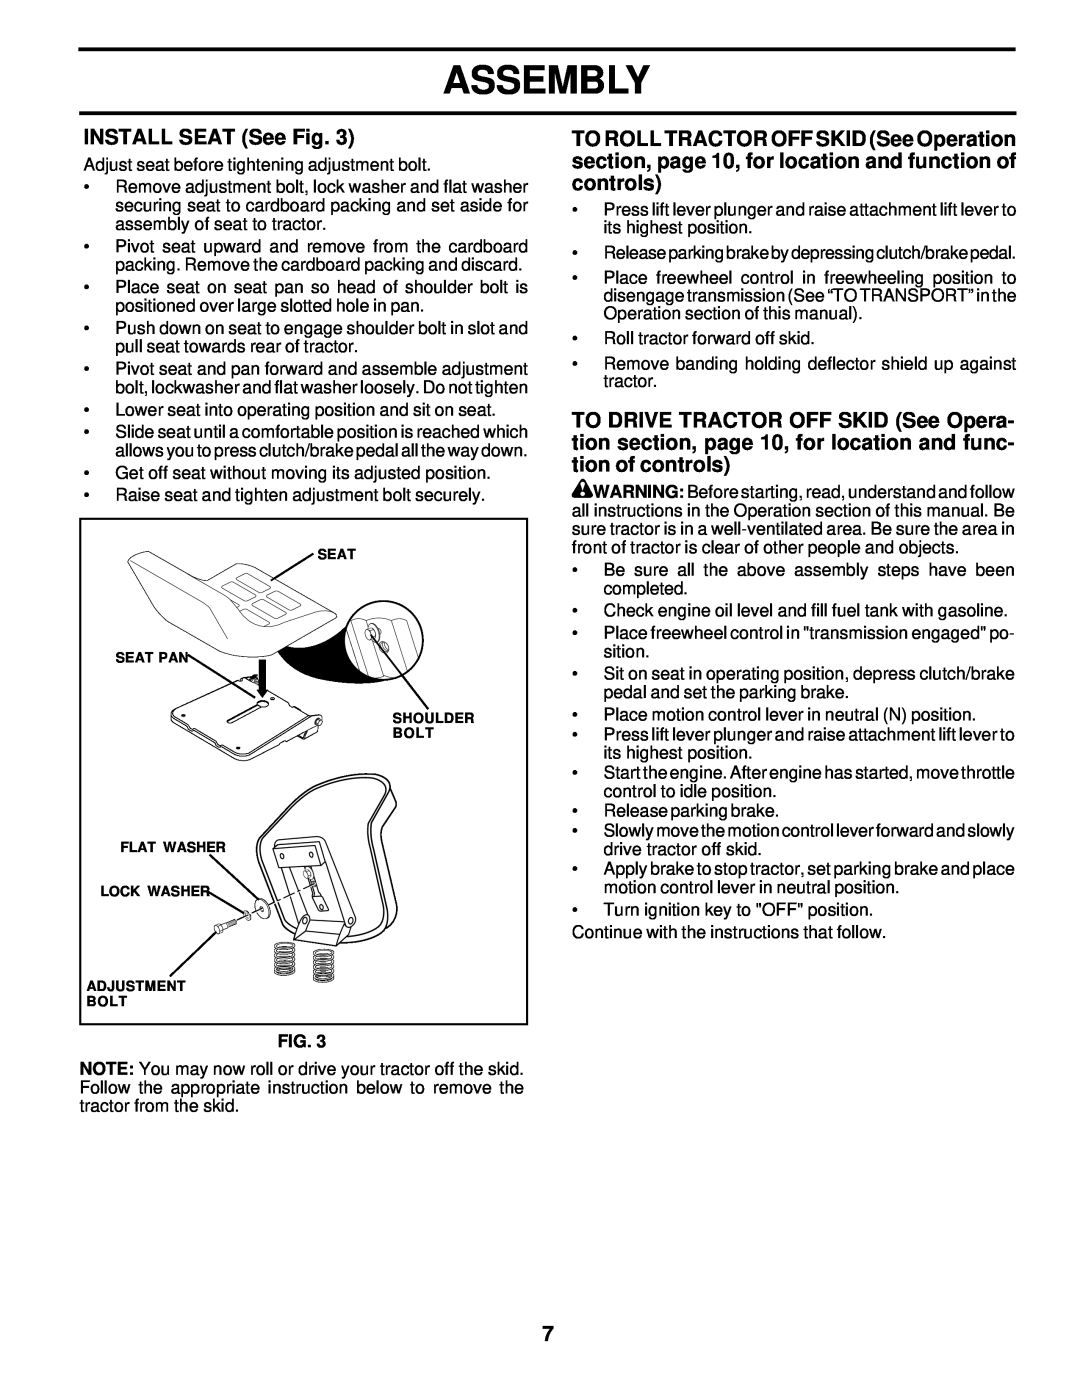 Poulan 176085 owner manual INSTALL SEAT See Fig, Assembly 